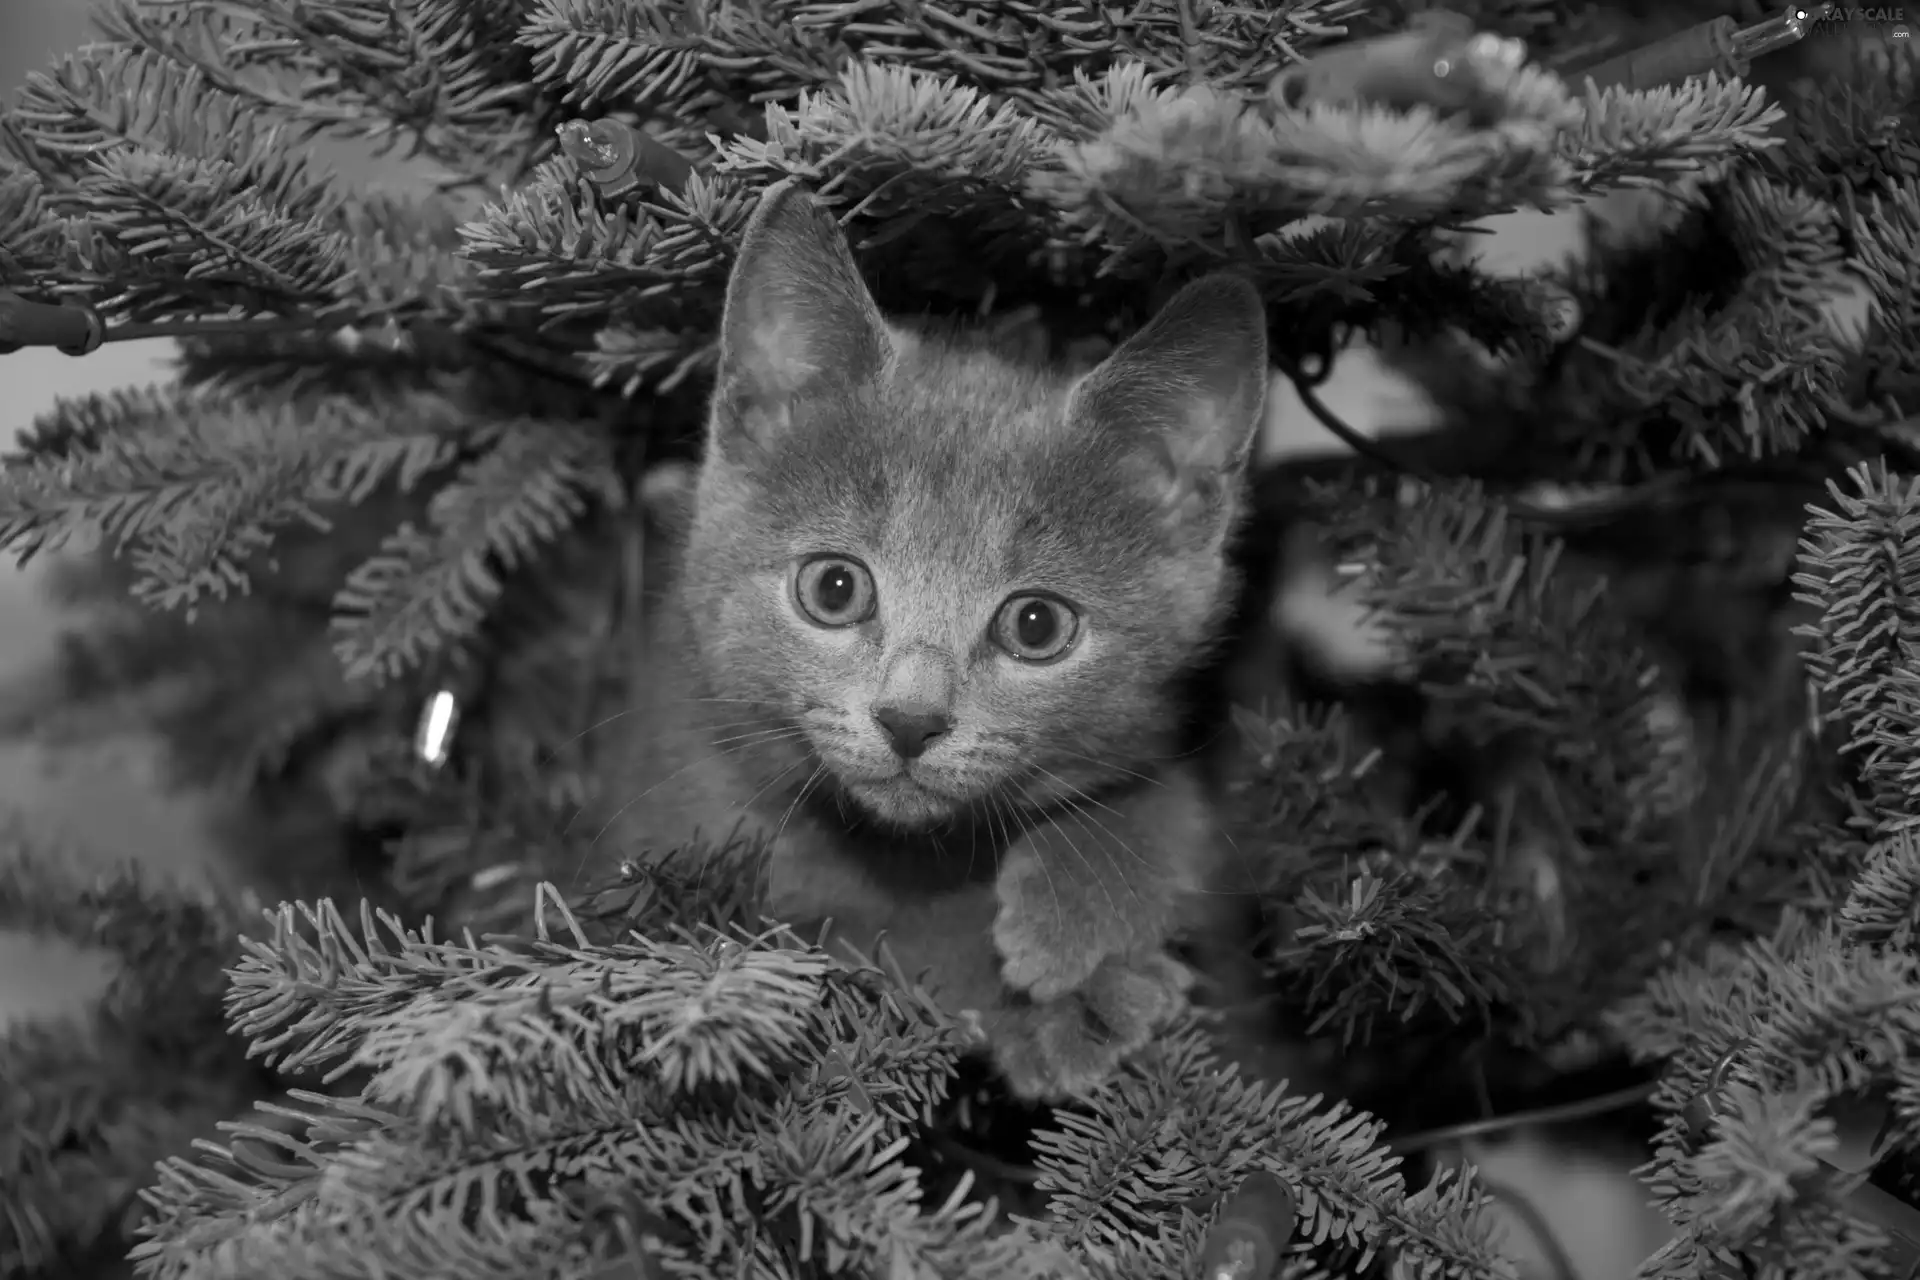 Softwood, trees, Gray, kitten, small